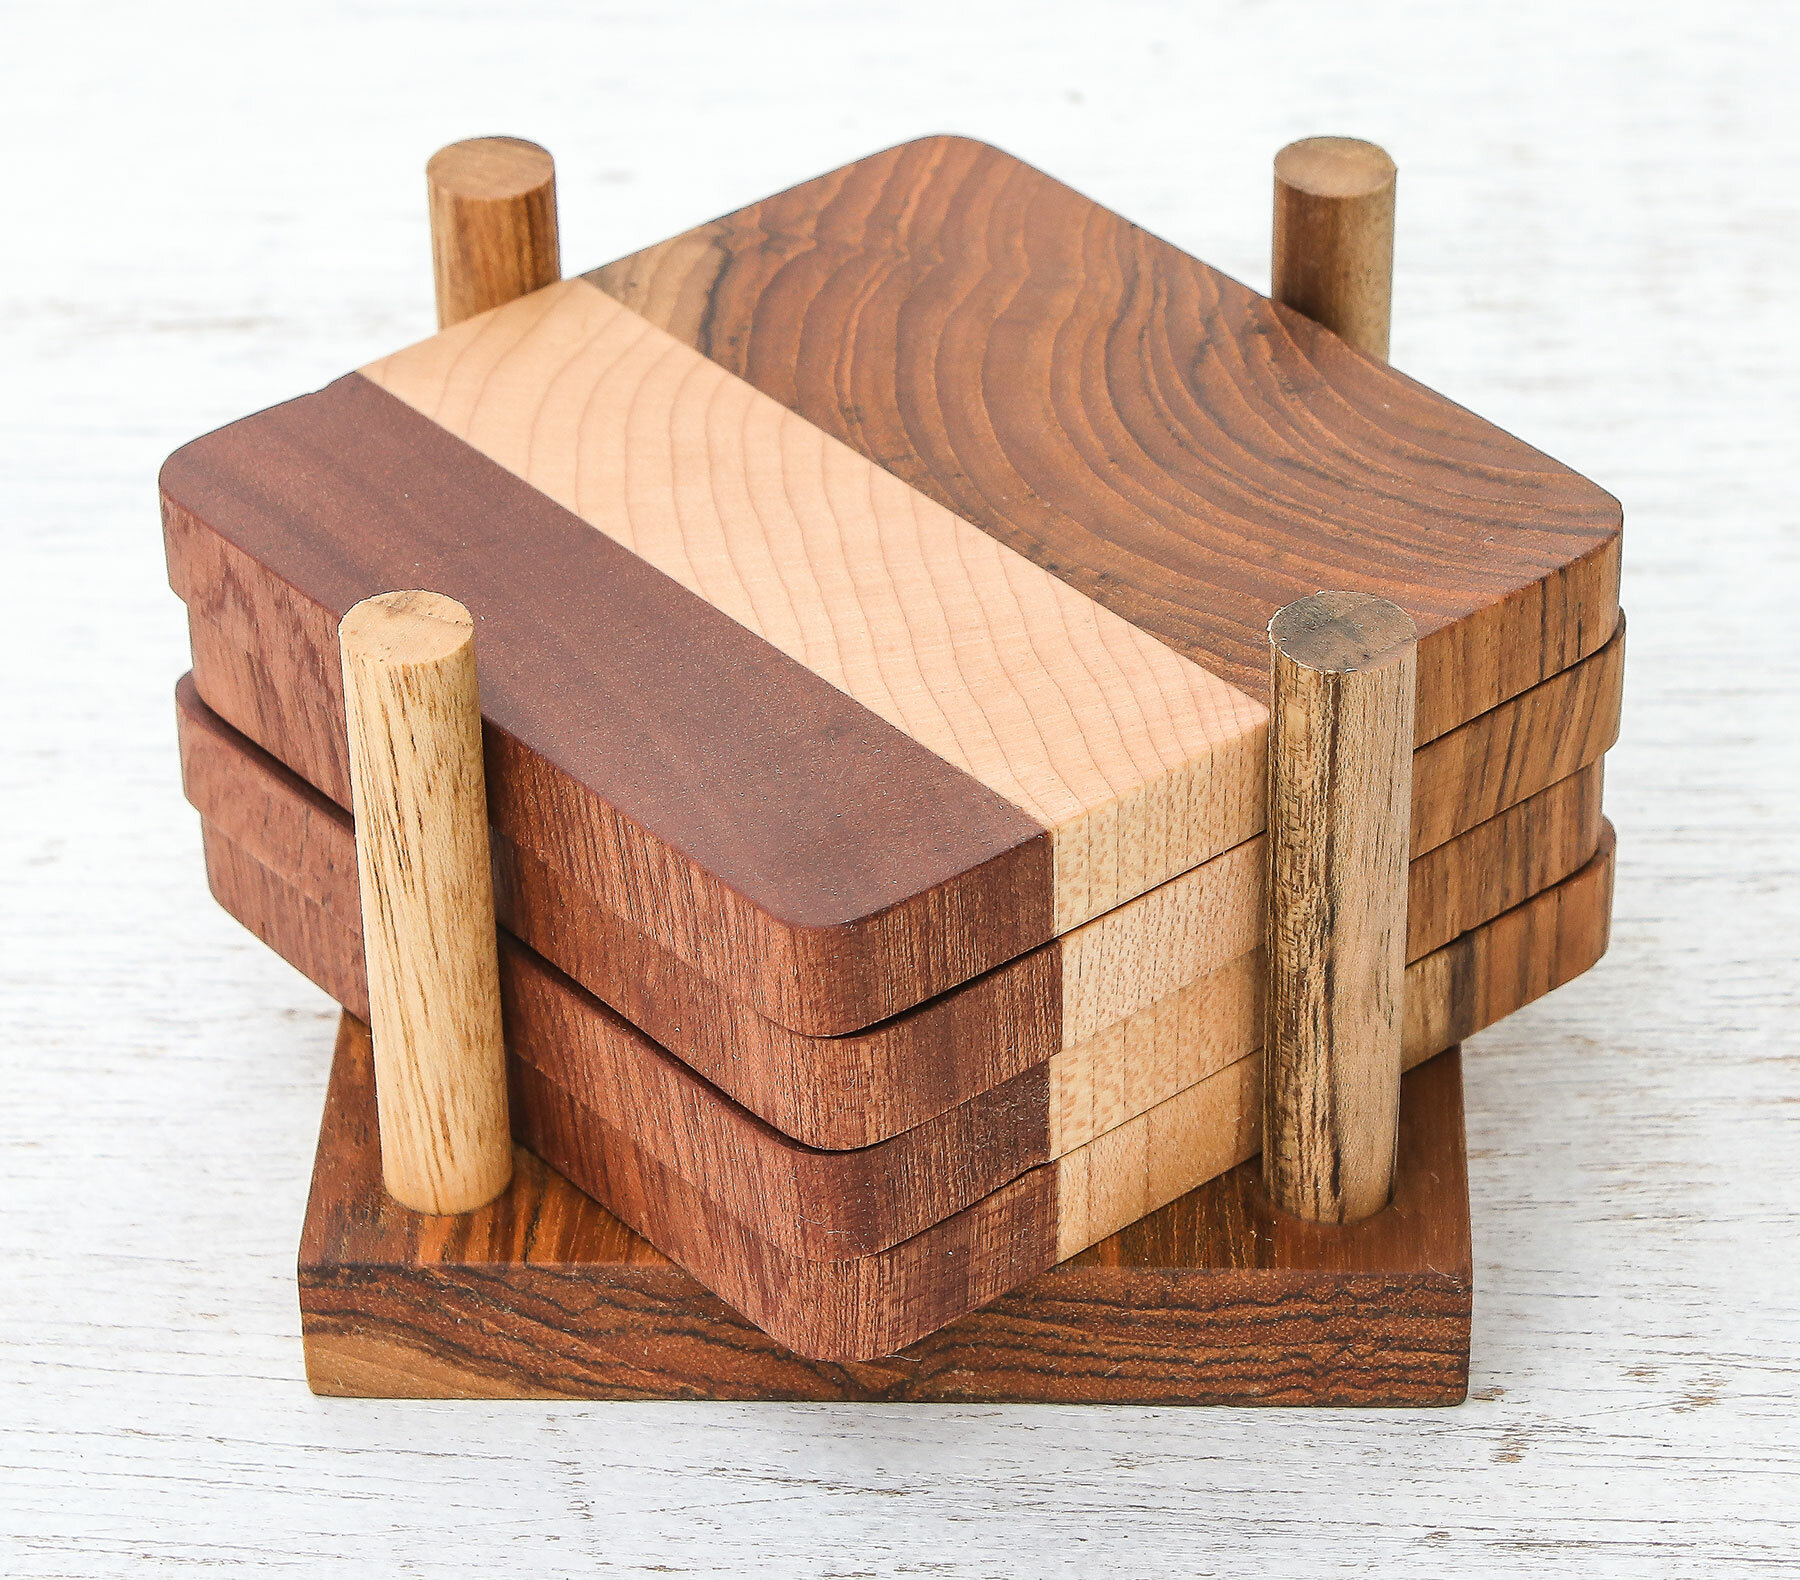 Coaster brass Bowl with hardwood for wine bottle - Nautic-Gifts